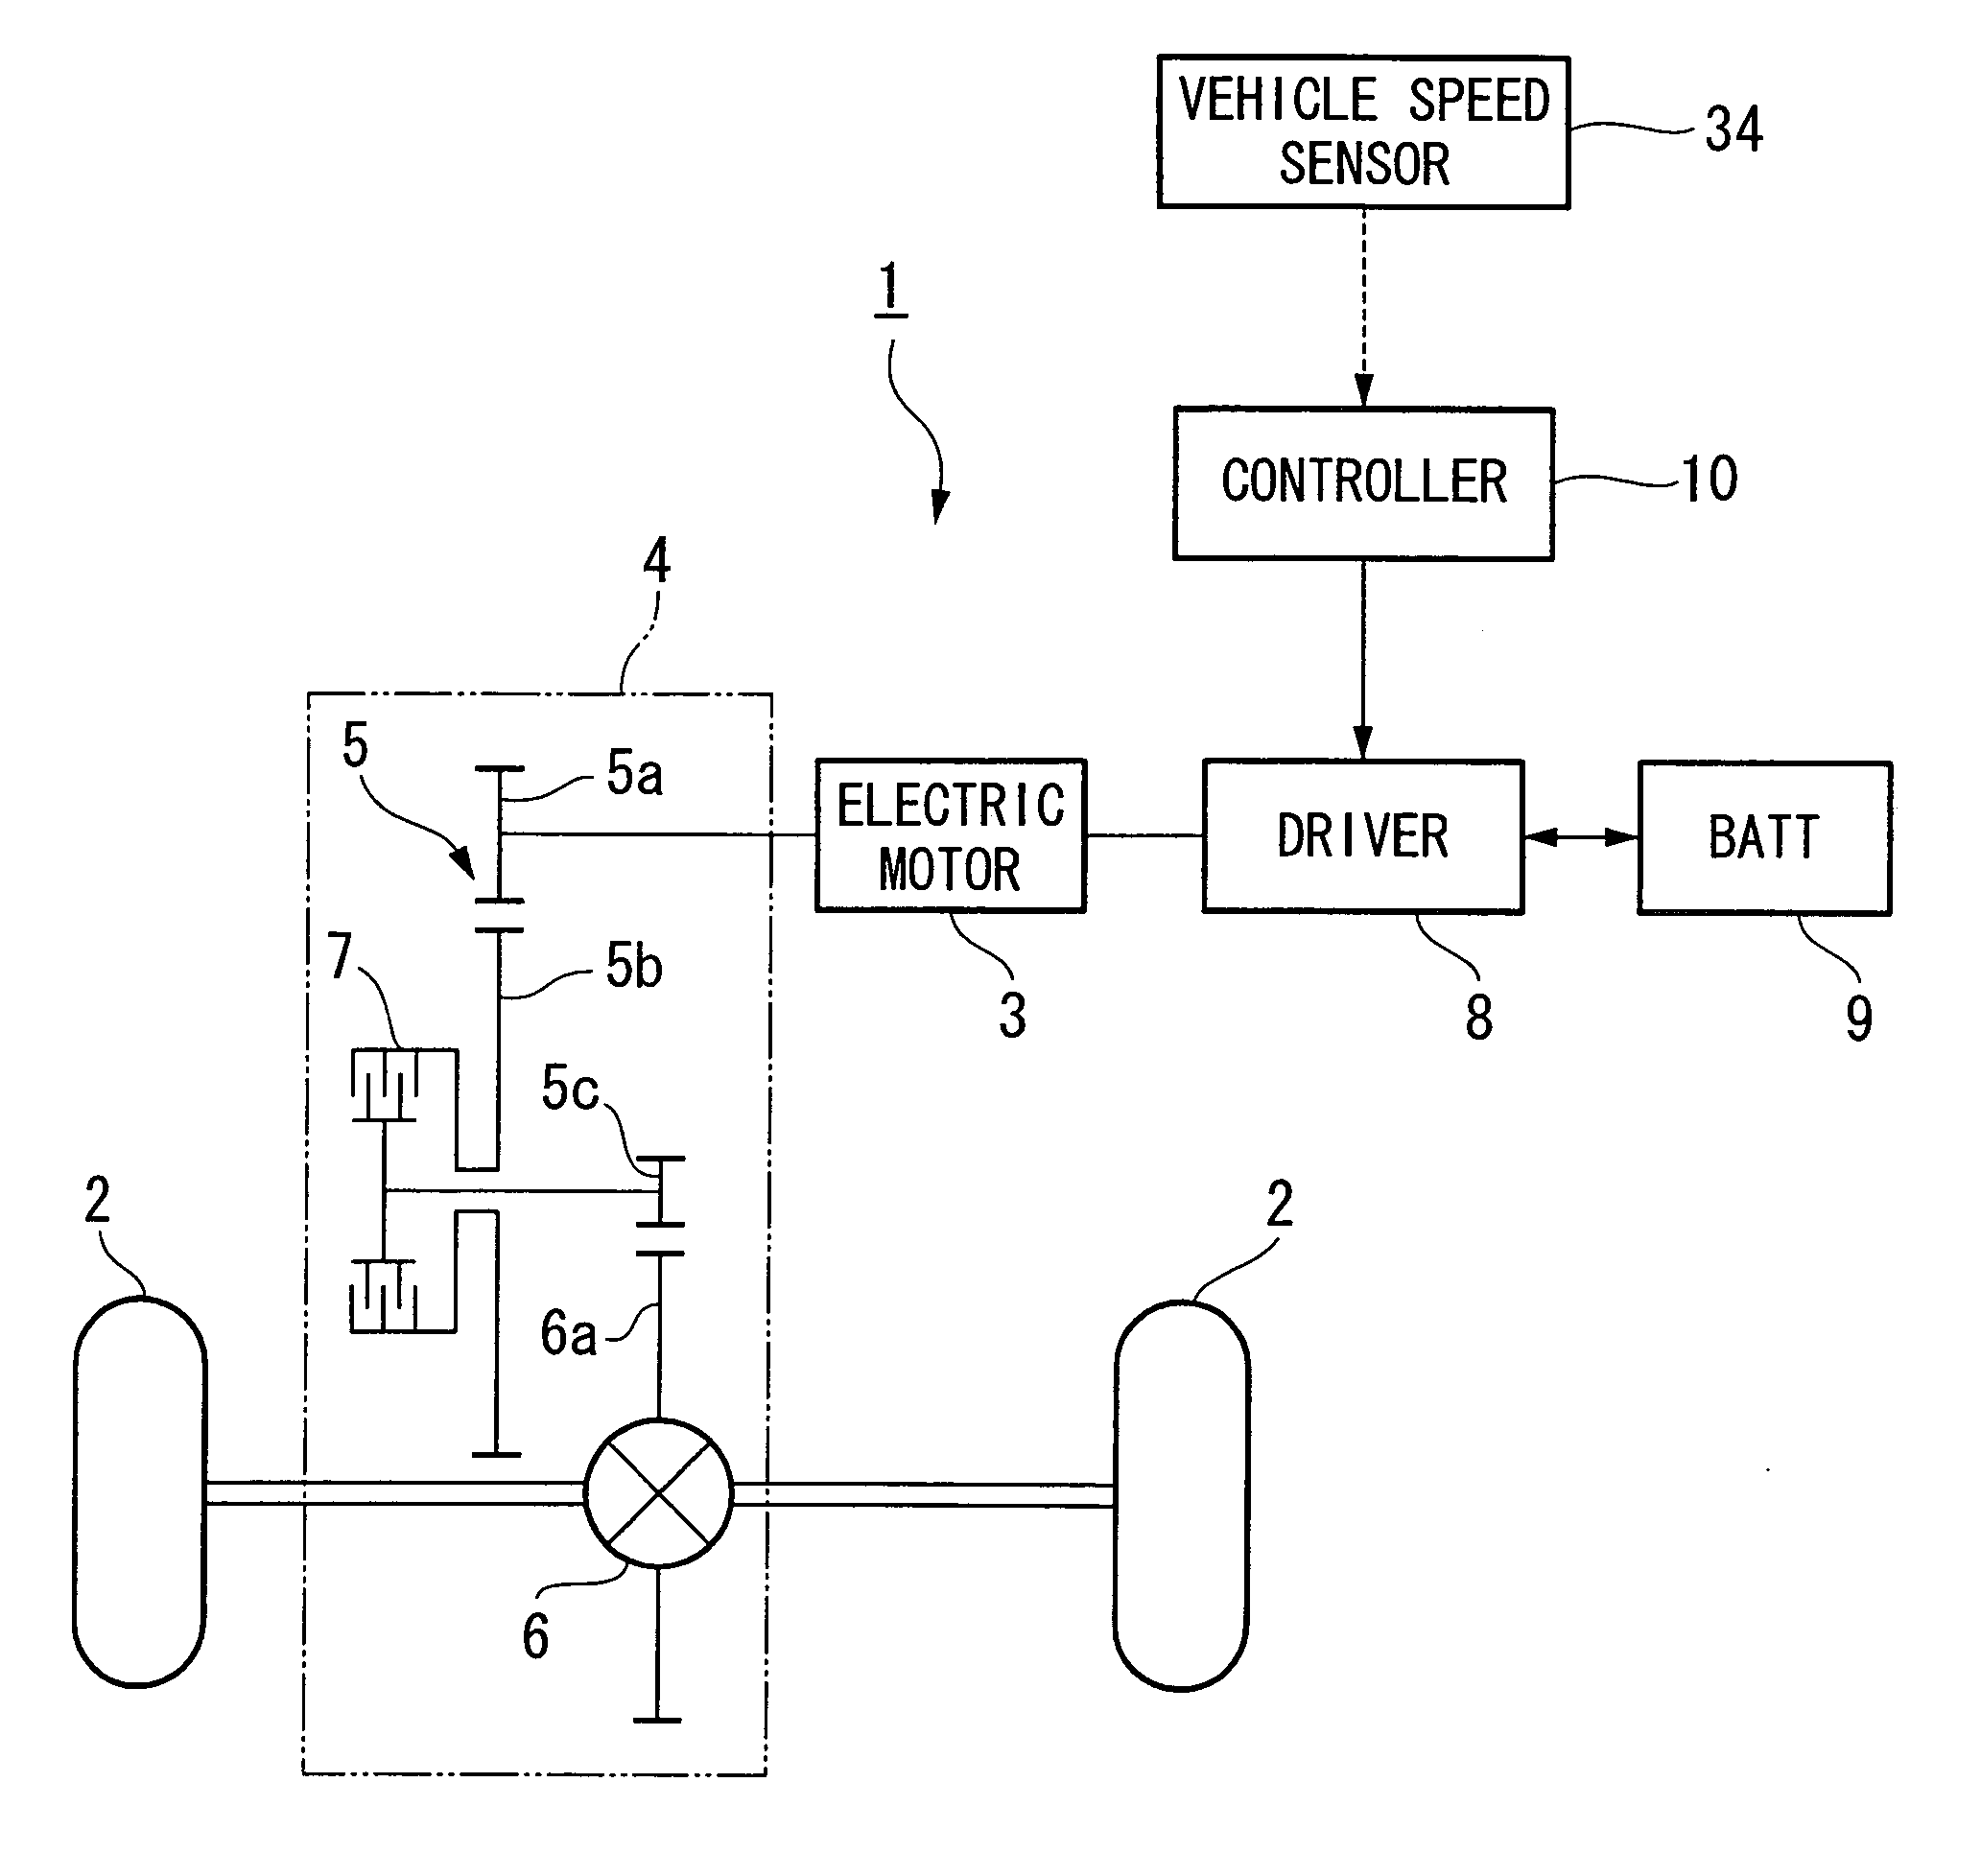 Control unit for an electric oil pump